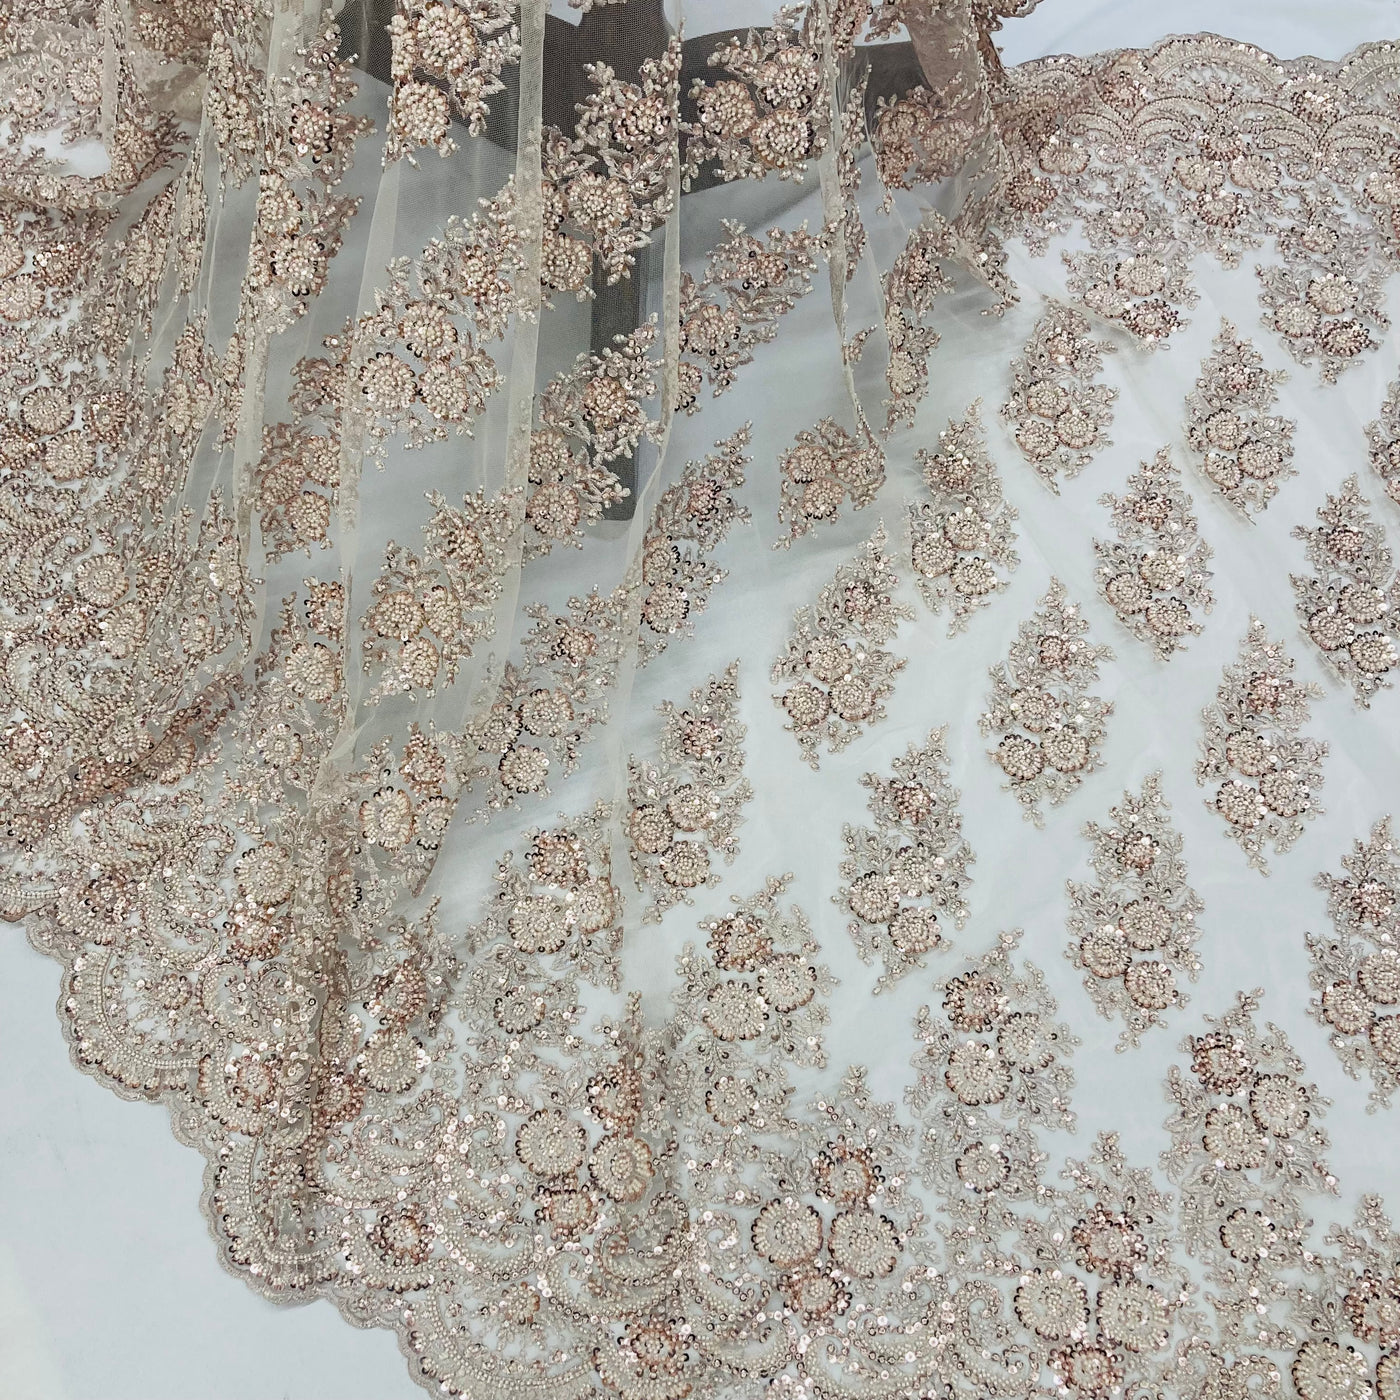 Embroidered & Beaded Net Mesh Fabric with Beads. Lace USA